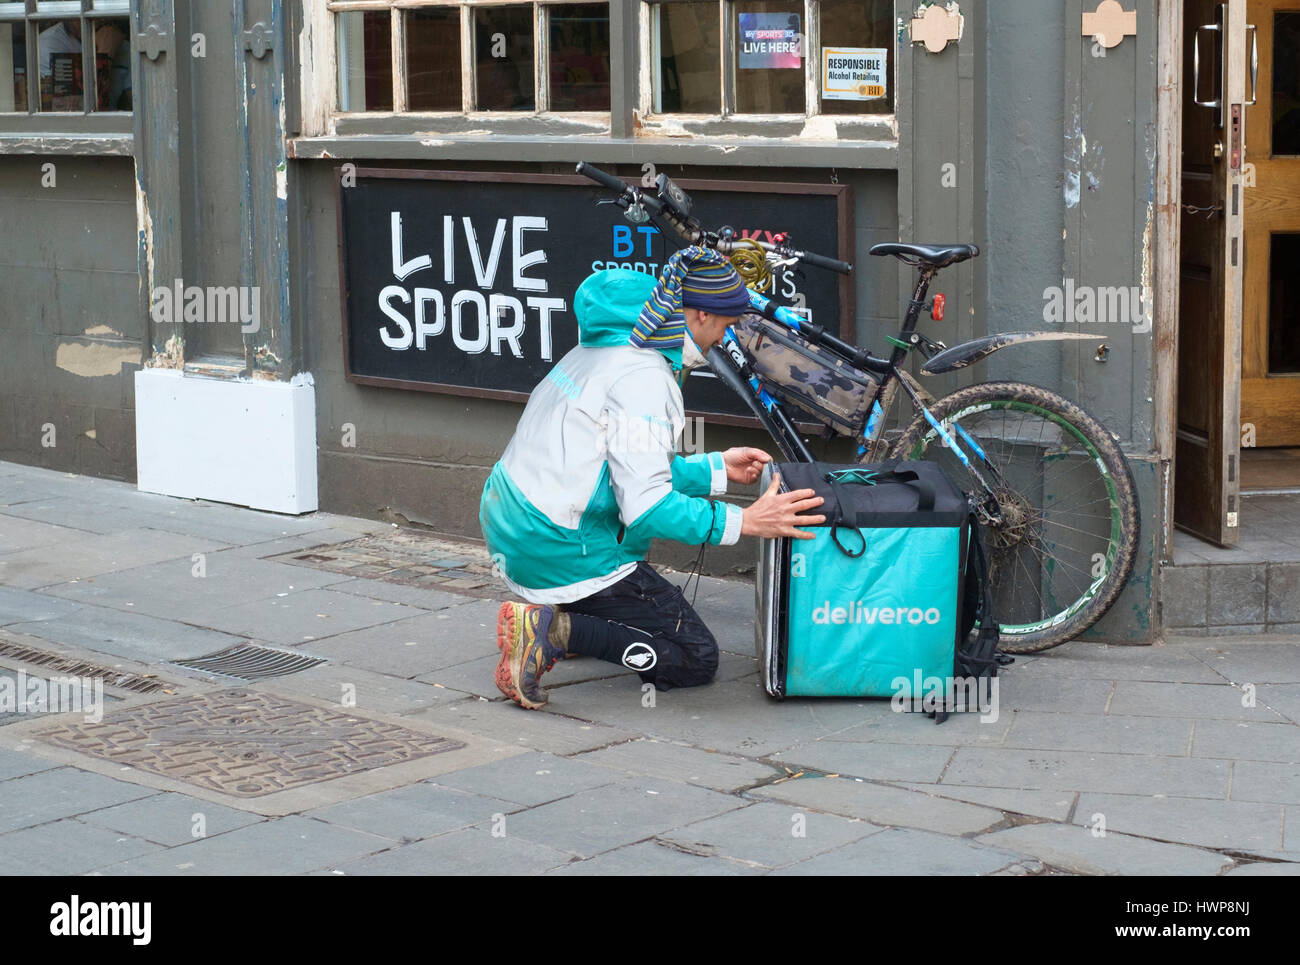 Deliveroo Rider collection Stock Photo